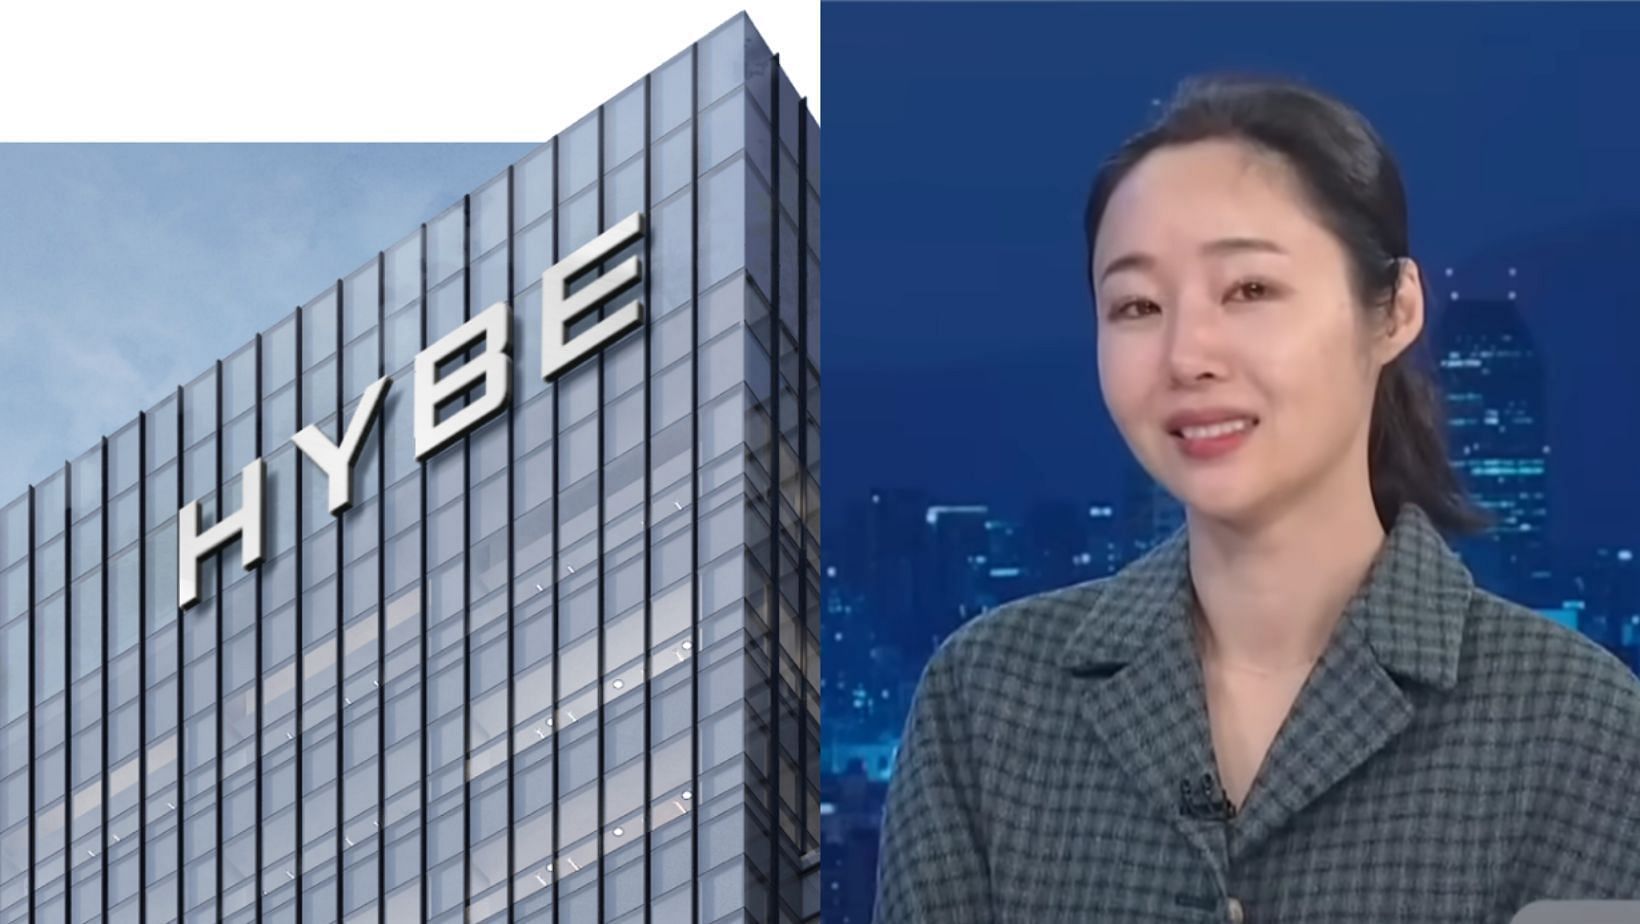 Min Hee-jin says she hopes of a reconciliation with HYBE in her interview with KBS. (Images via HYBE website and YouTube/KBS News)